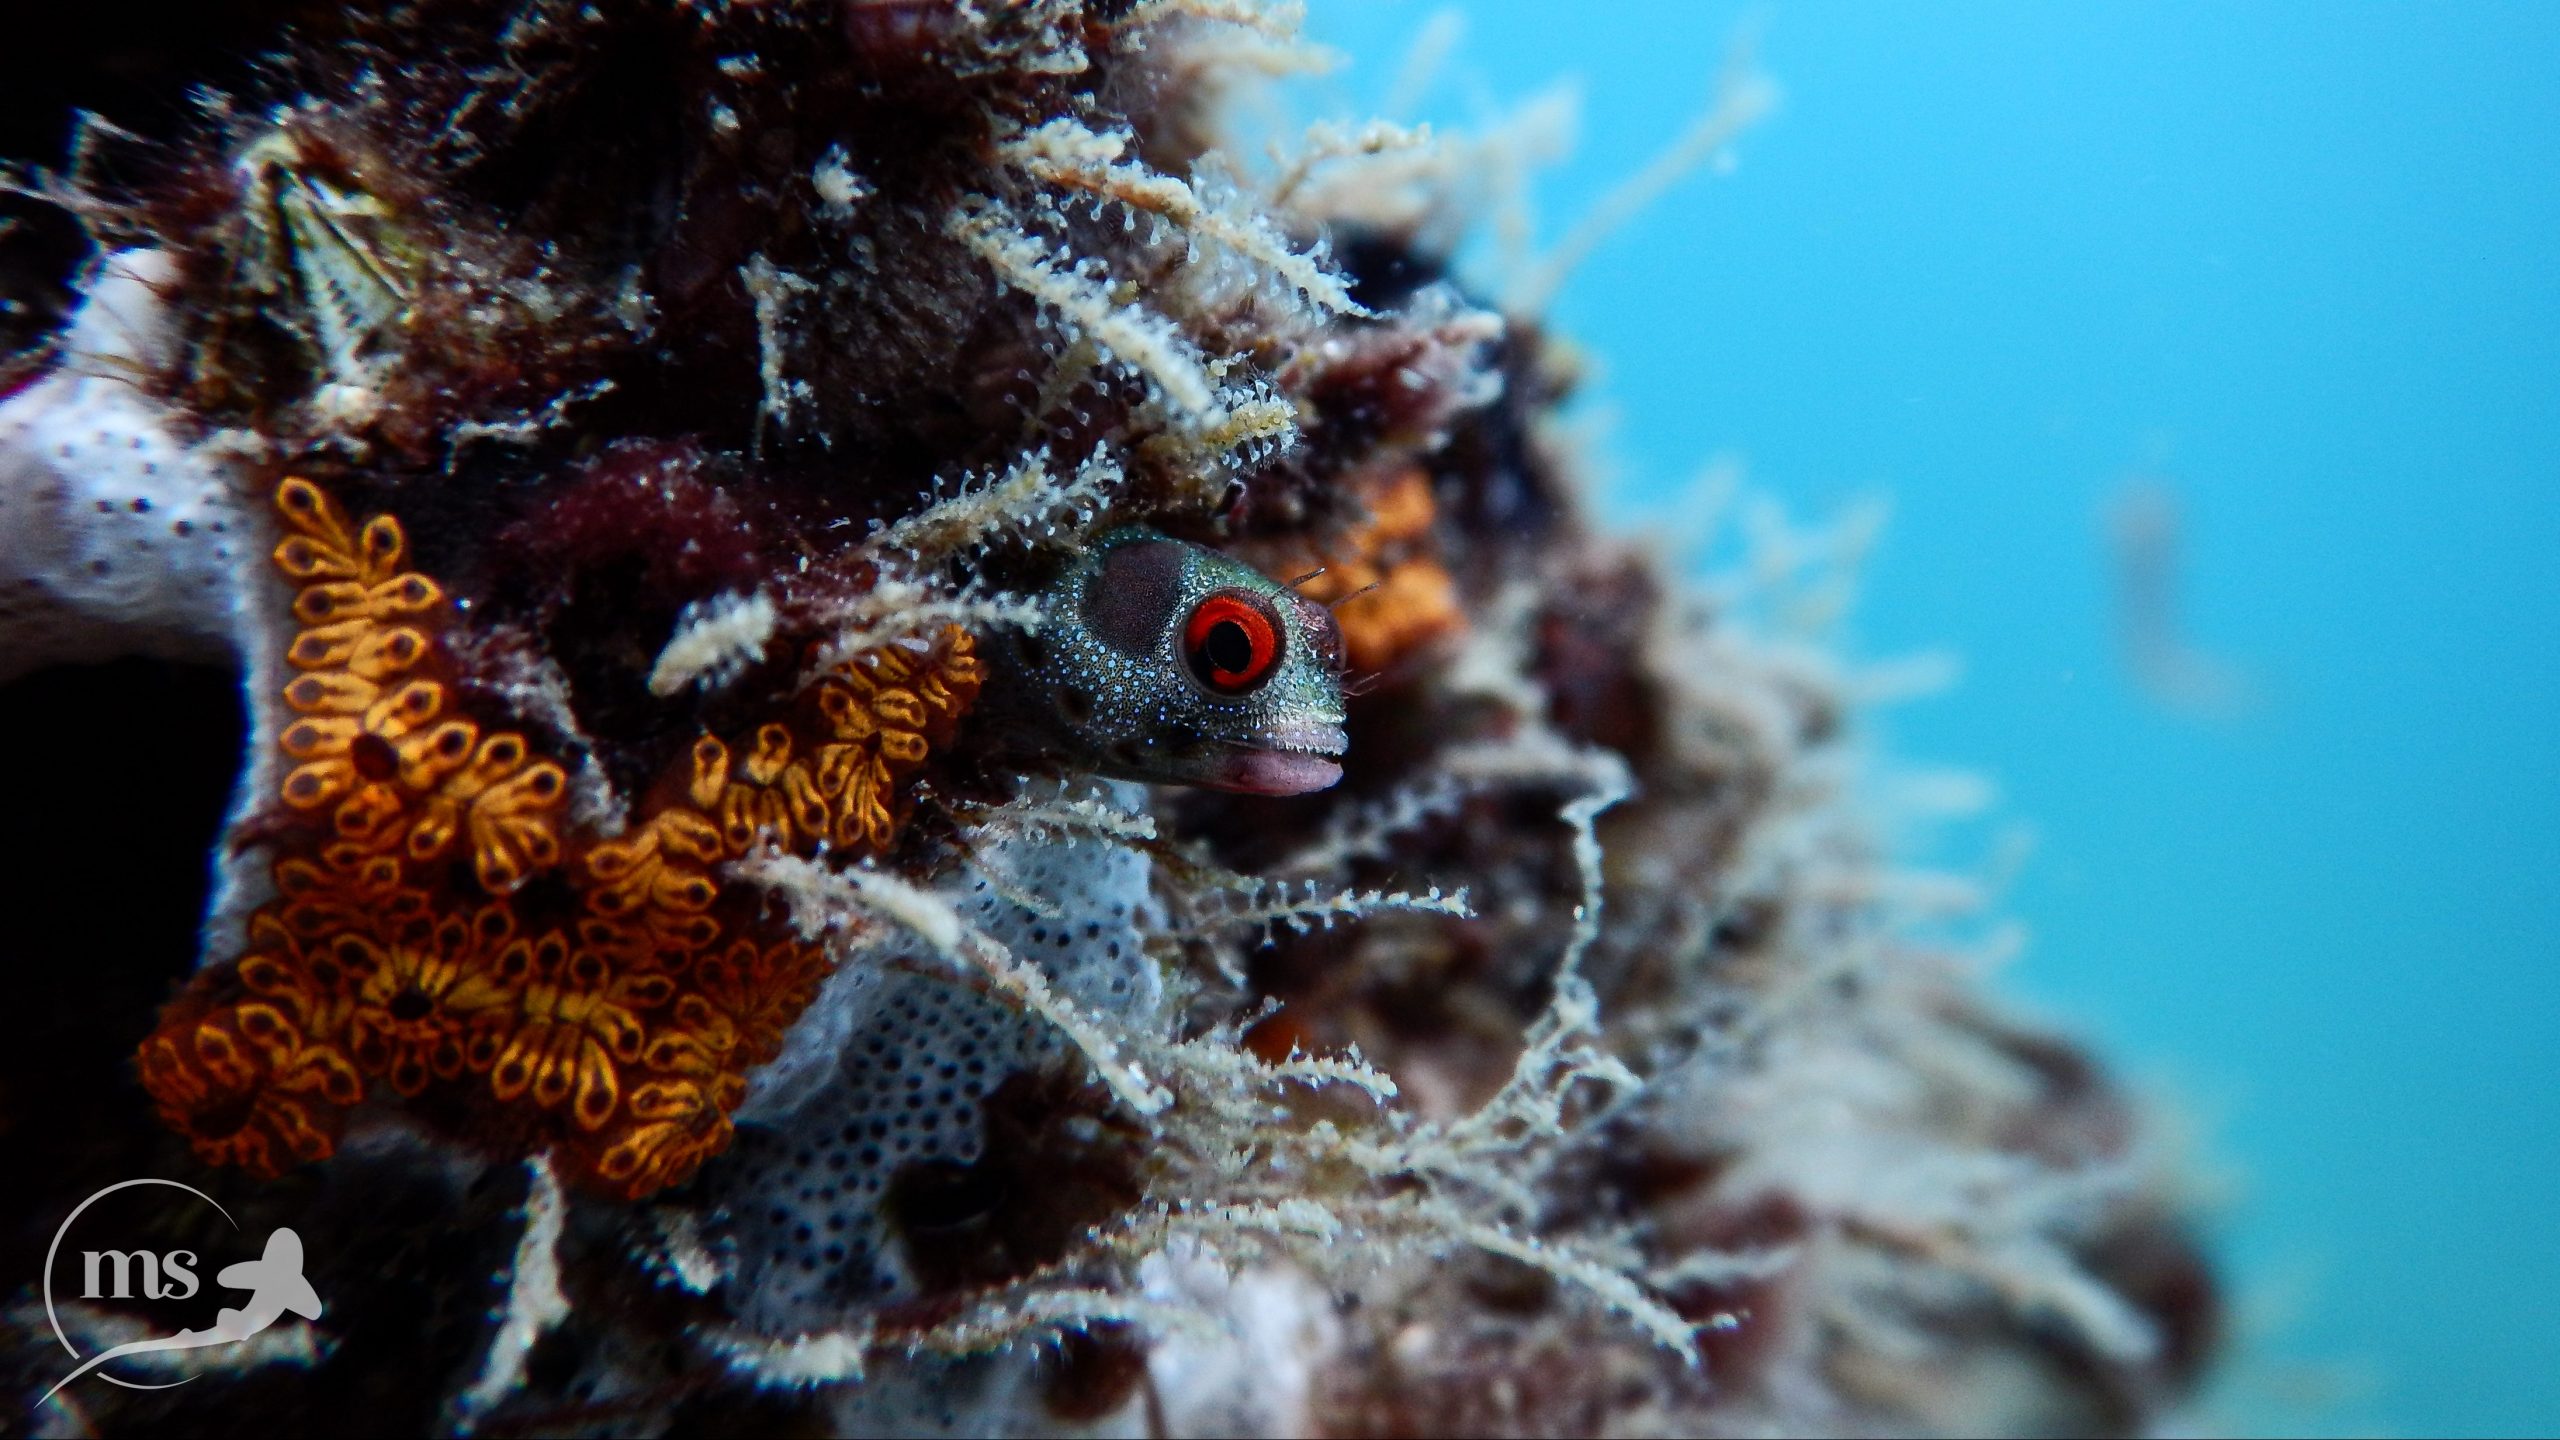 Blenny hiding in the coral reef